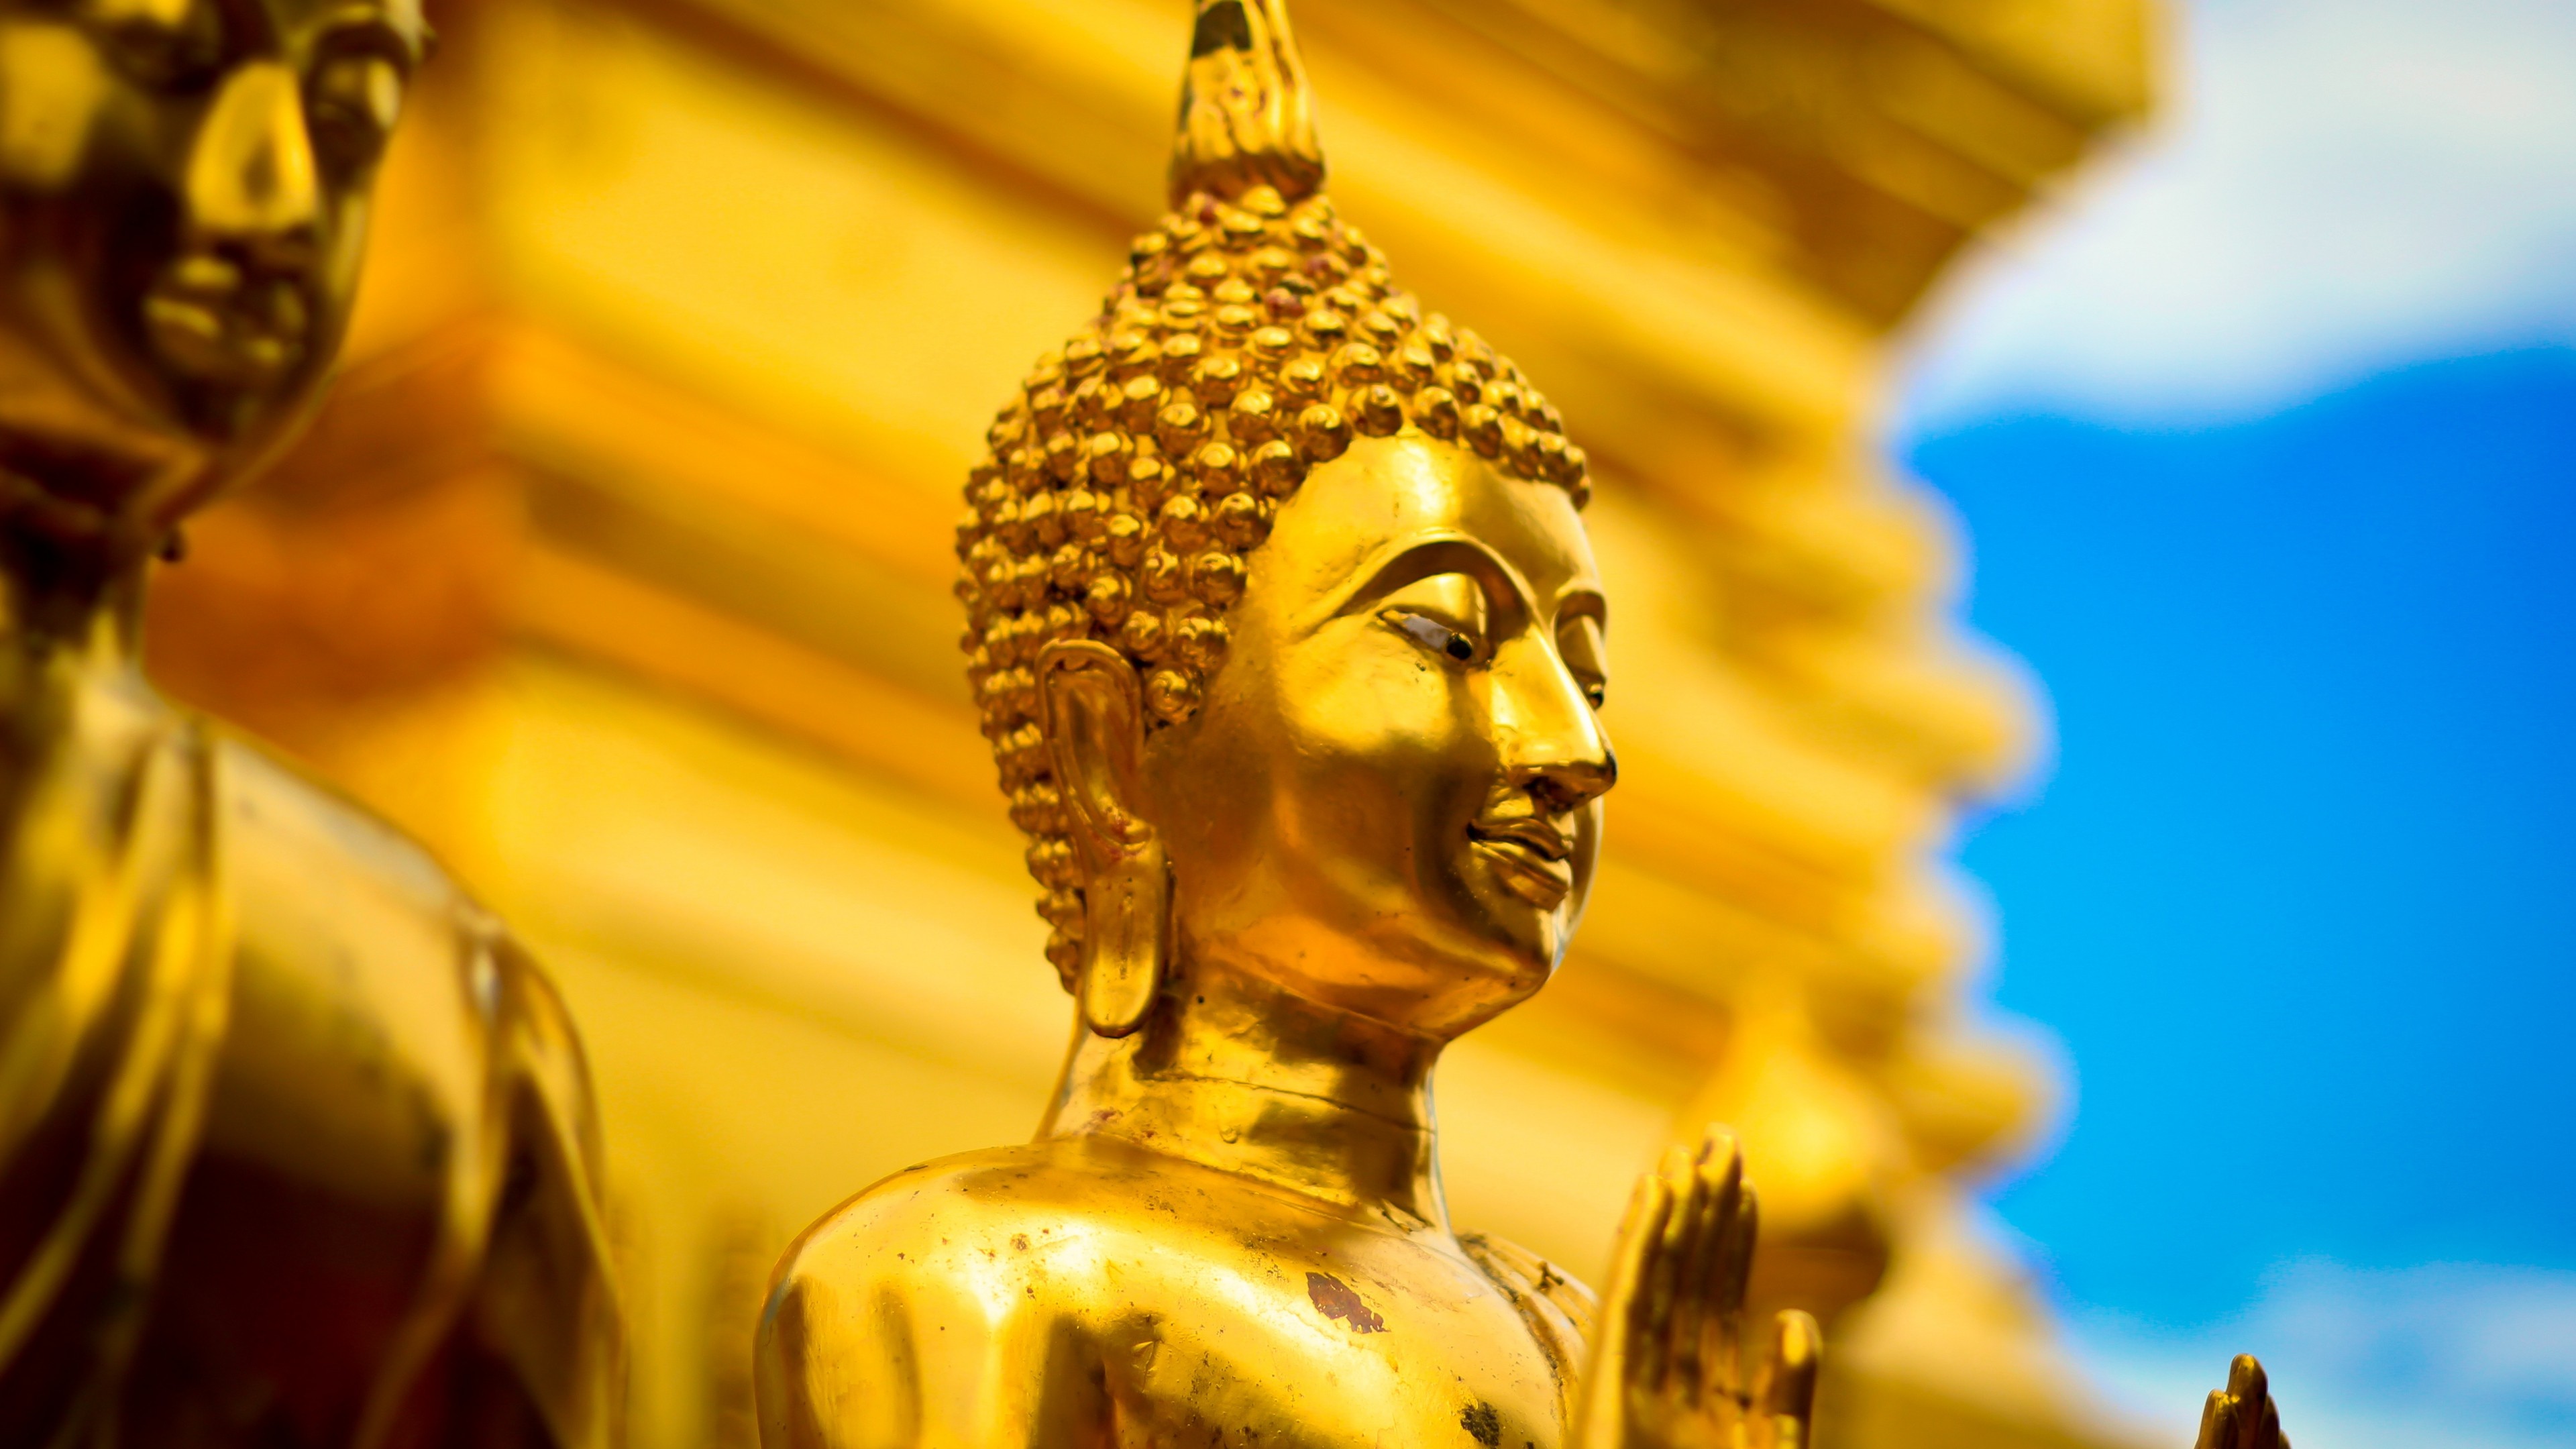 General 3840x2160 nature landscape clouds depth of field Buddha Buddhism gold statue temple Thailand Asia face religion